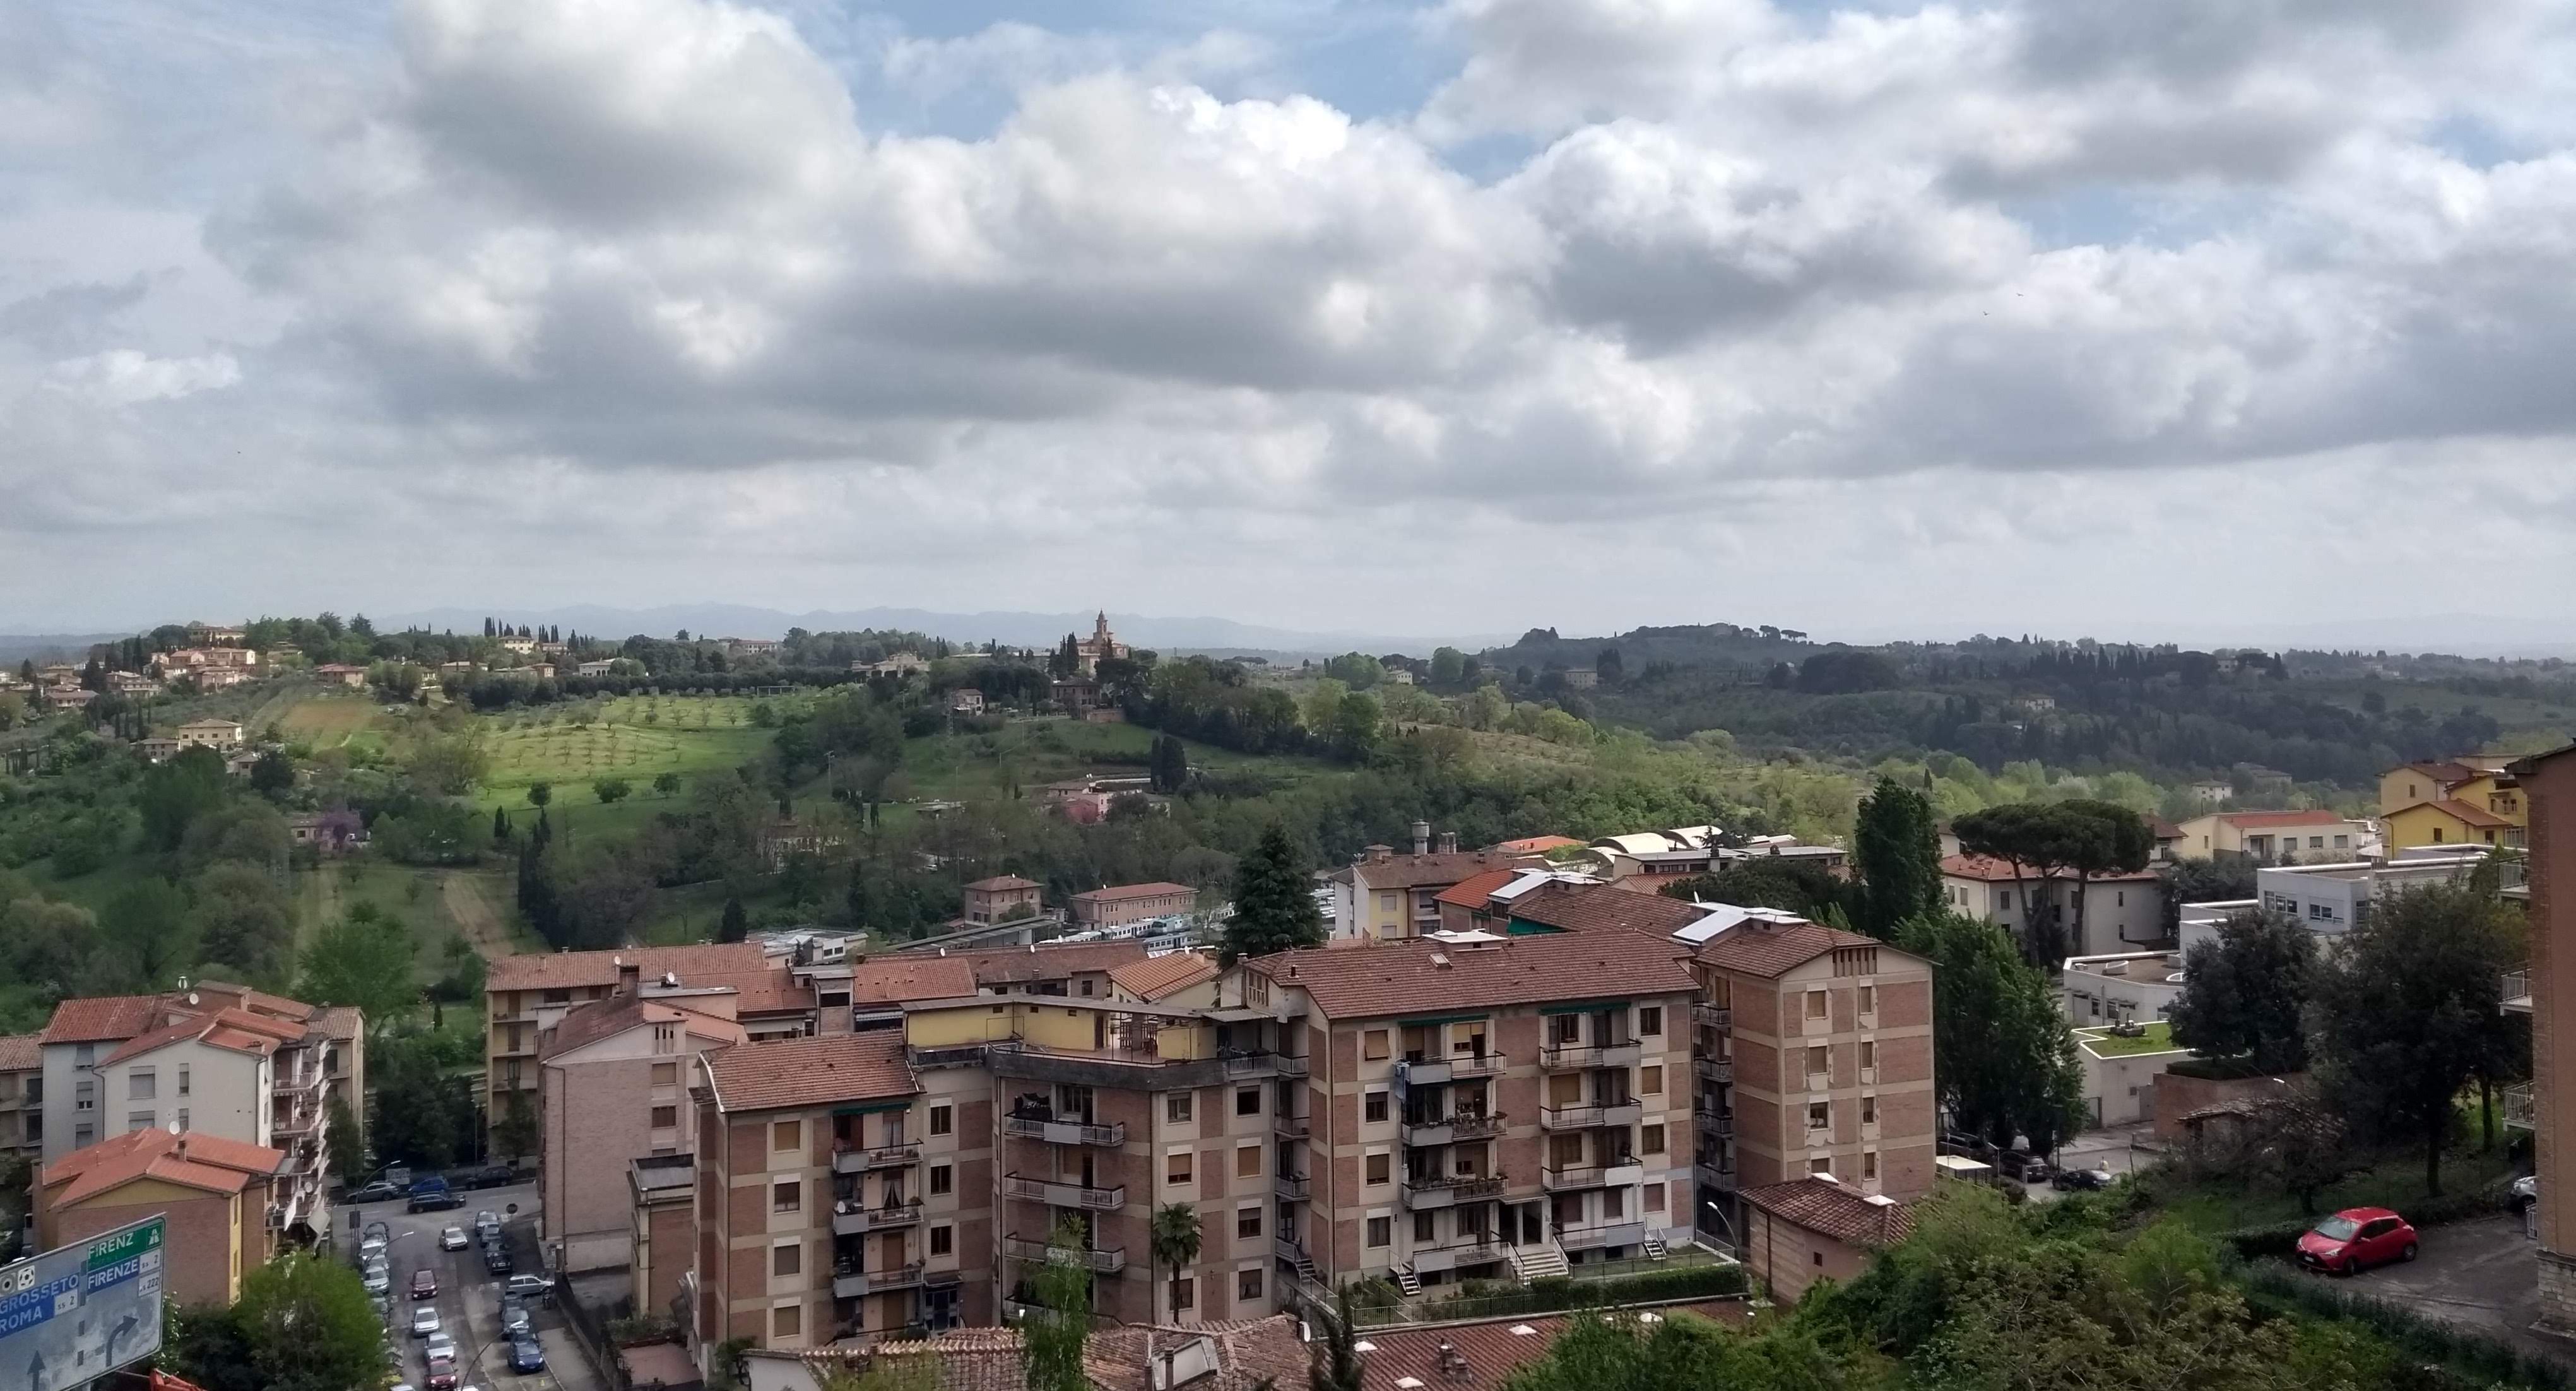 View over unlovely Siena flats, to green fields and forested hills beyond